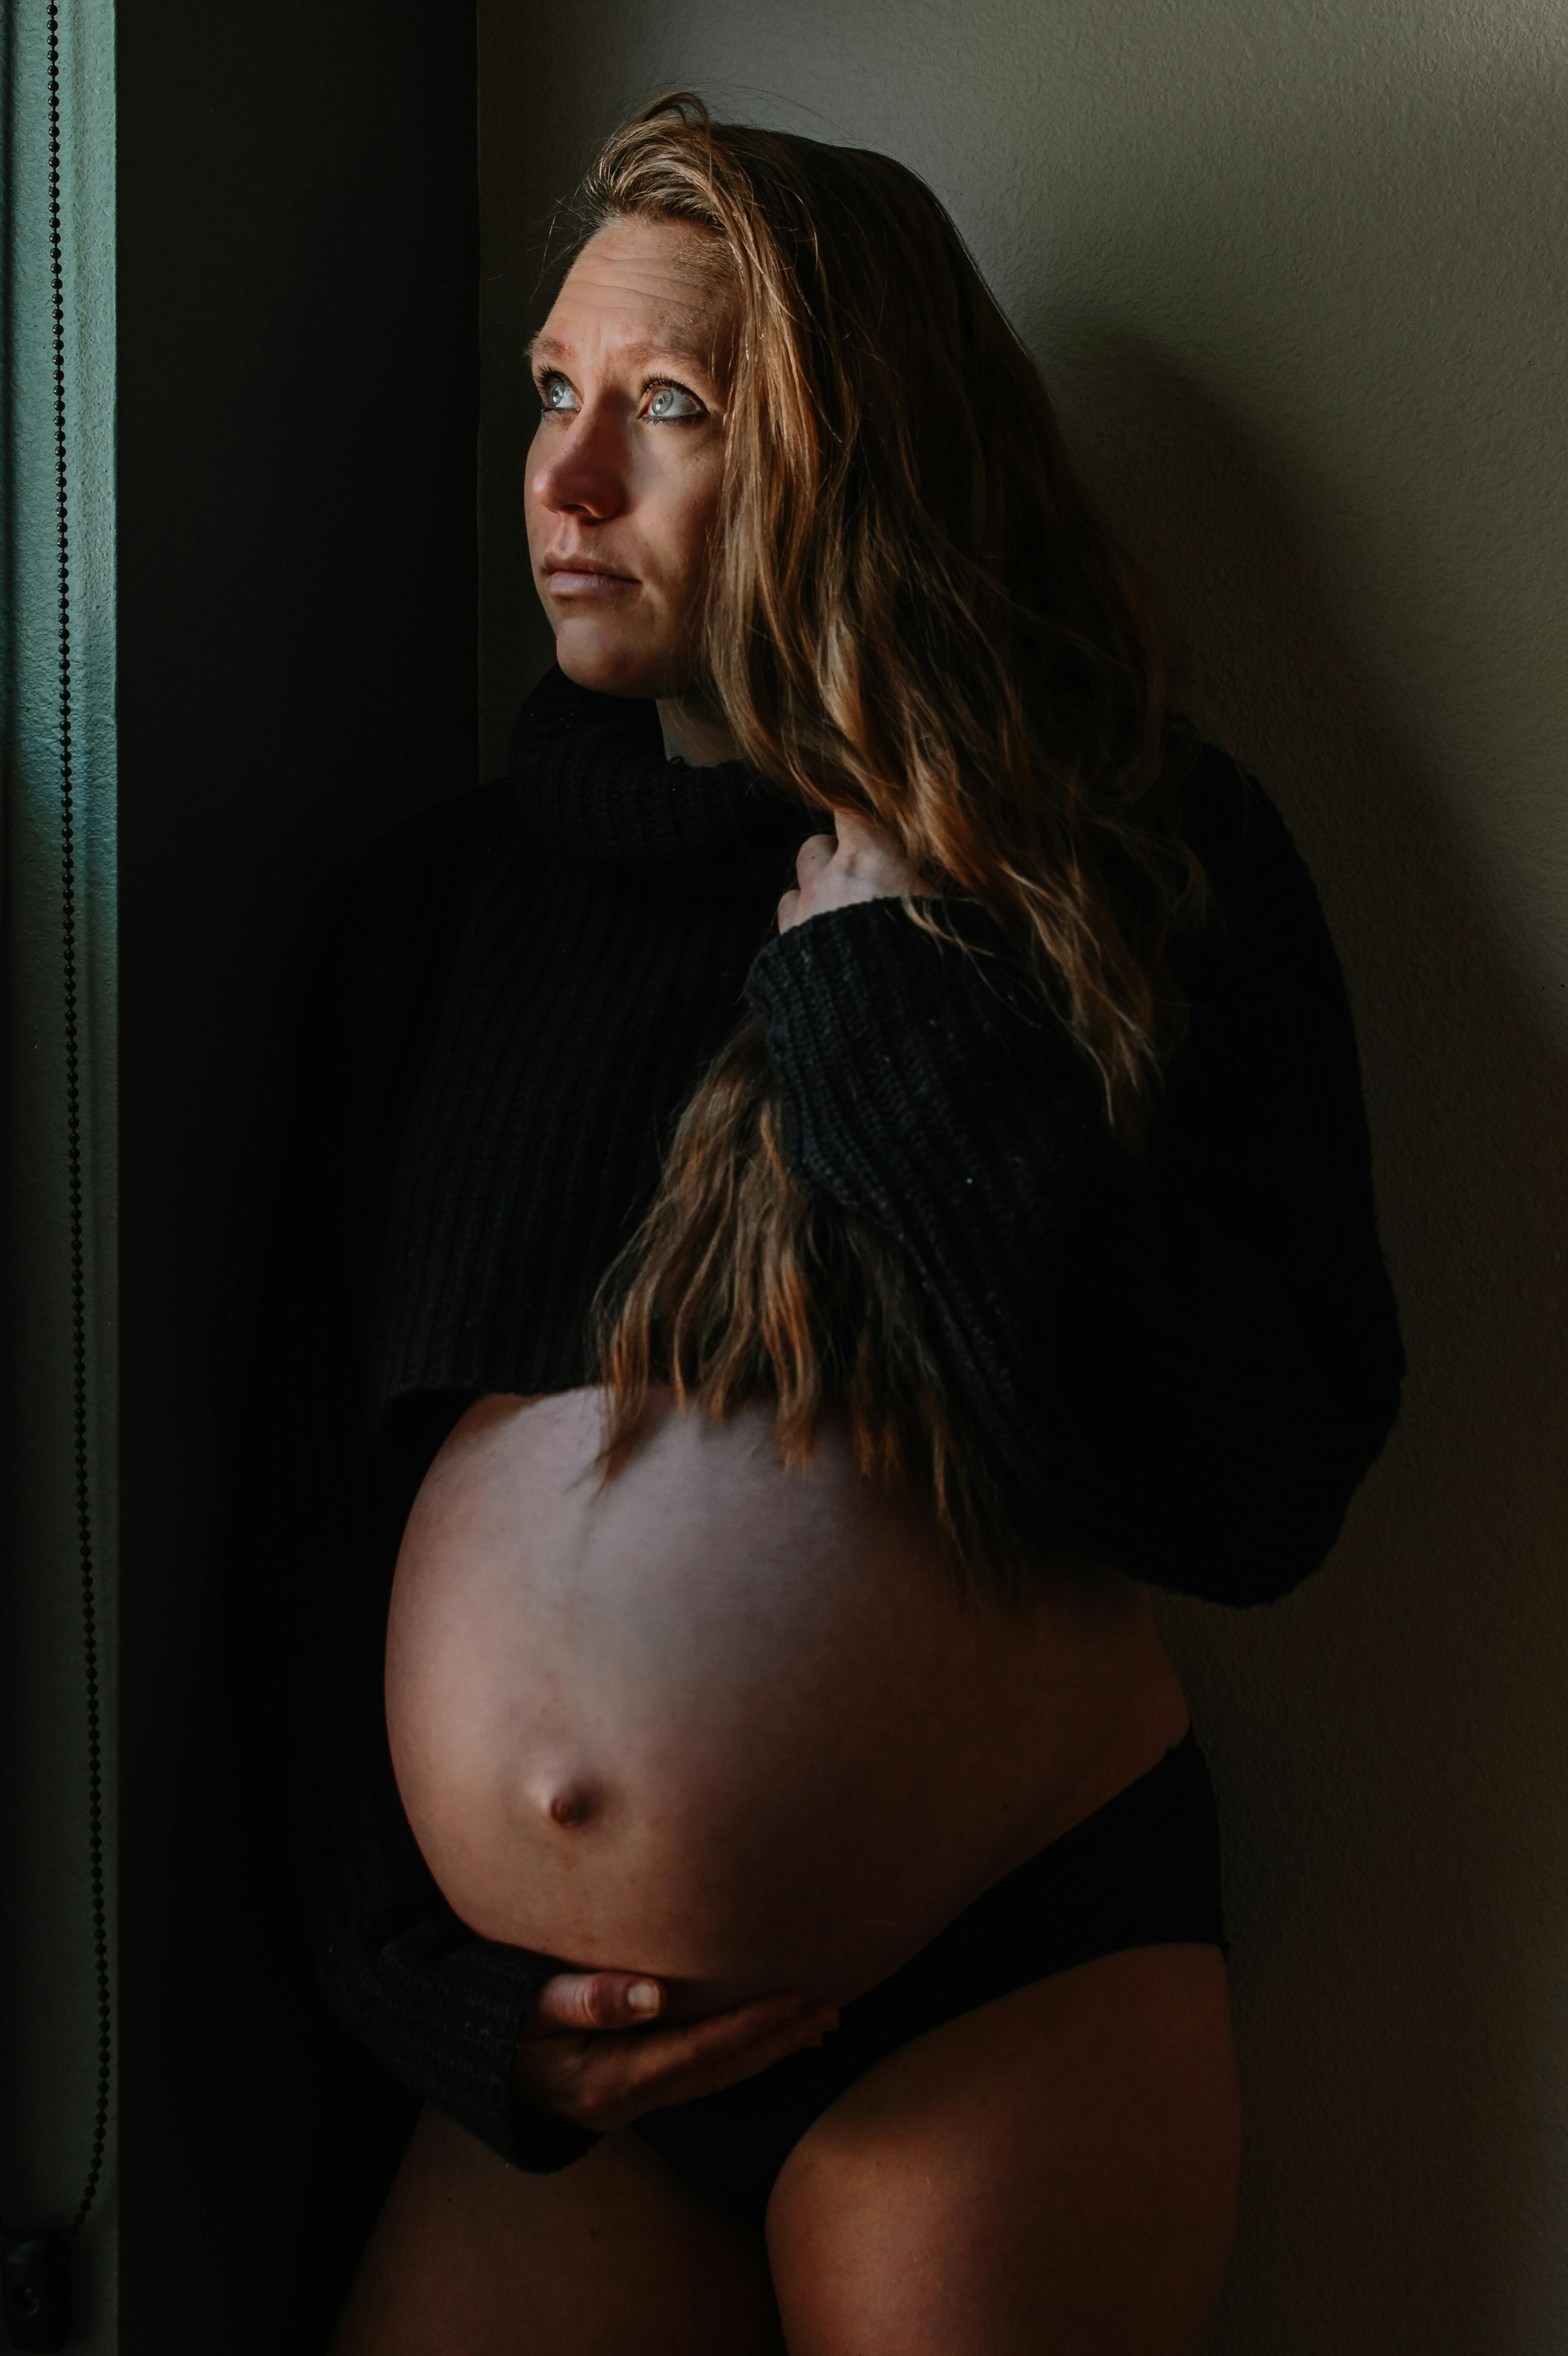 A Pregnant Woman Holding Her Belly · Free Stock Photo